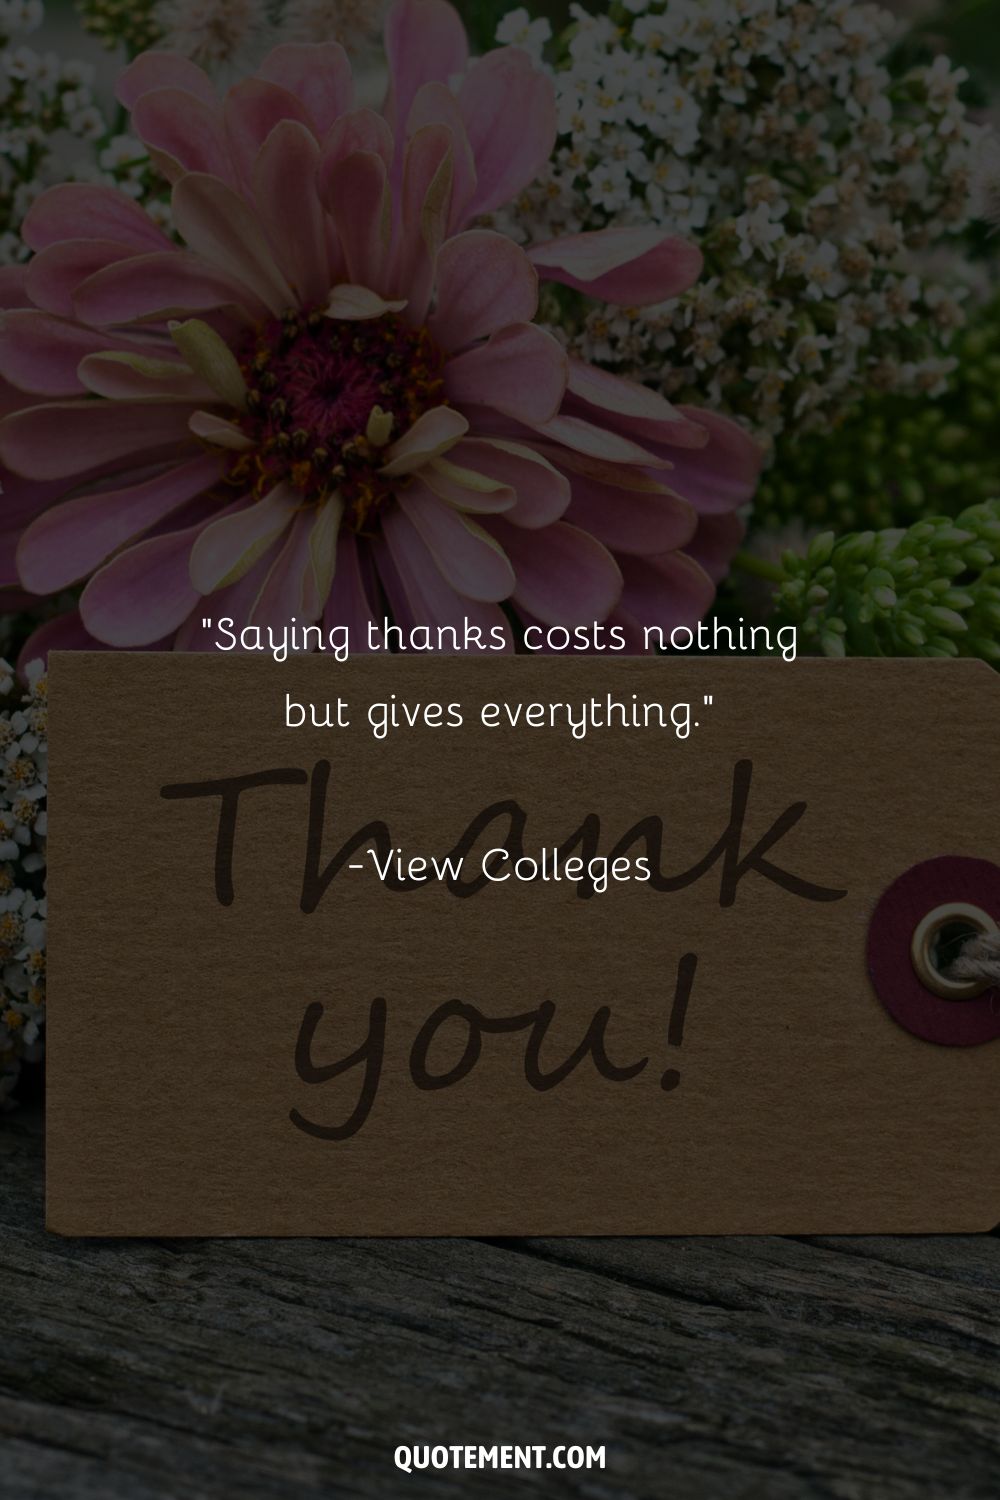 Saying thanks costs nothing but gives everything.